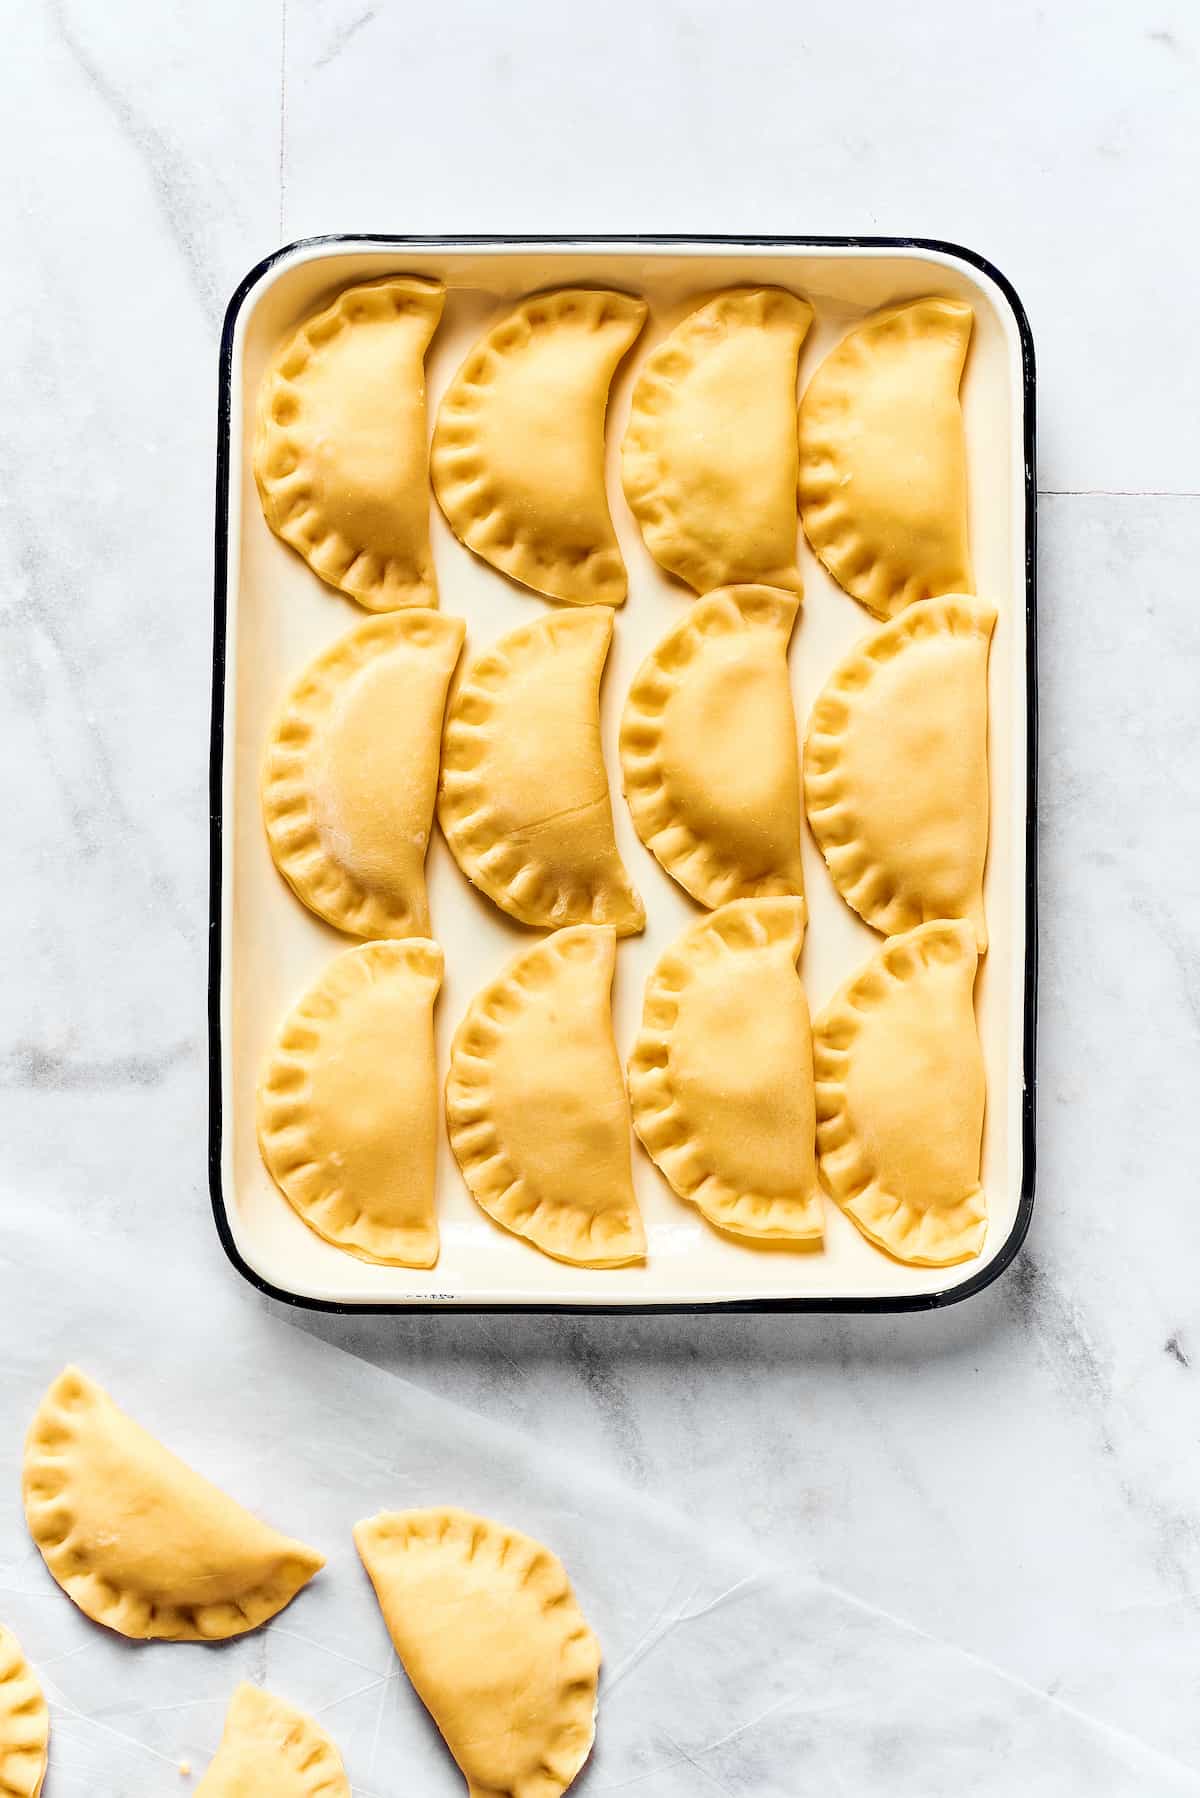 A tray of uncooked pierogies.